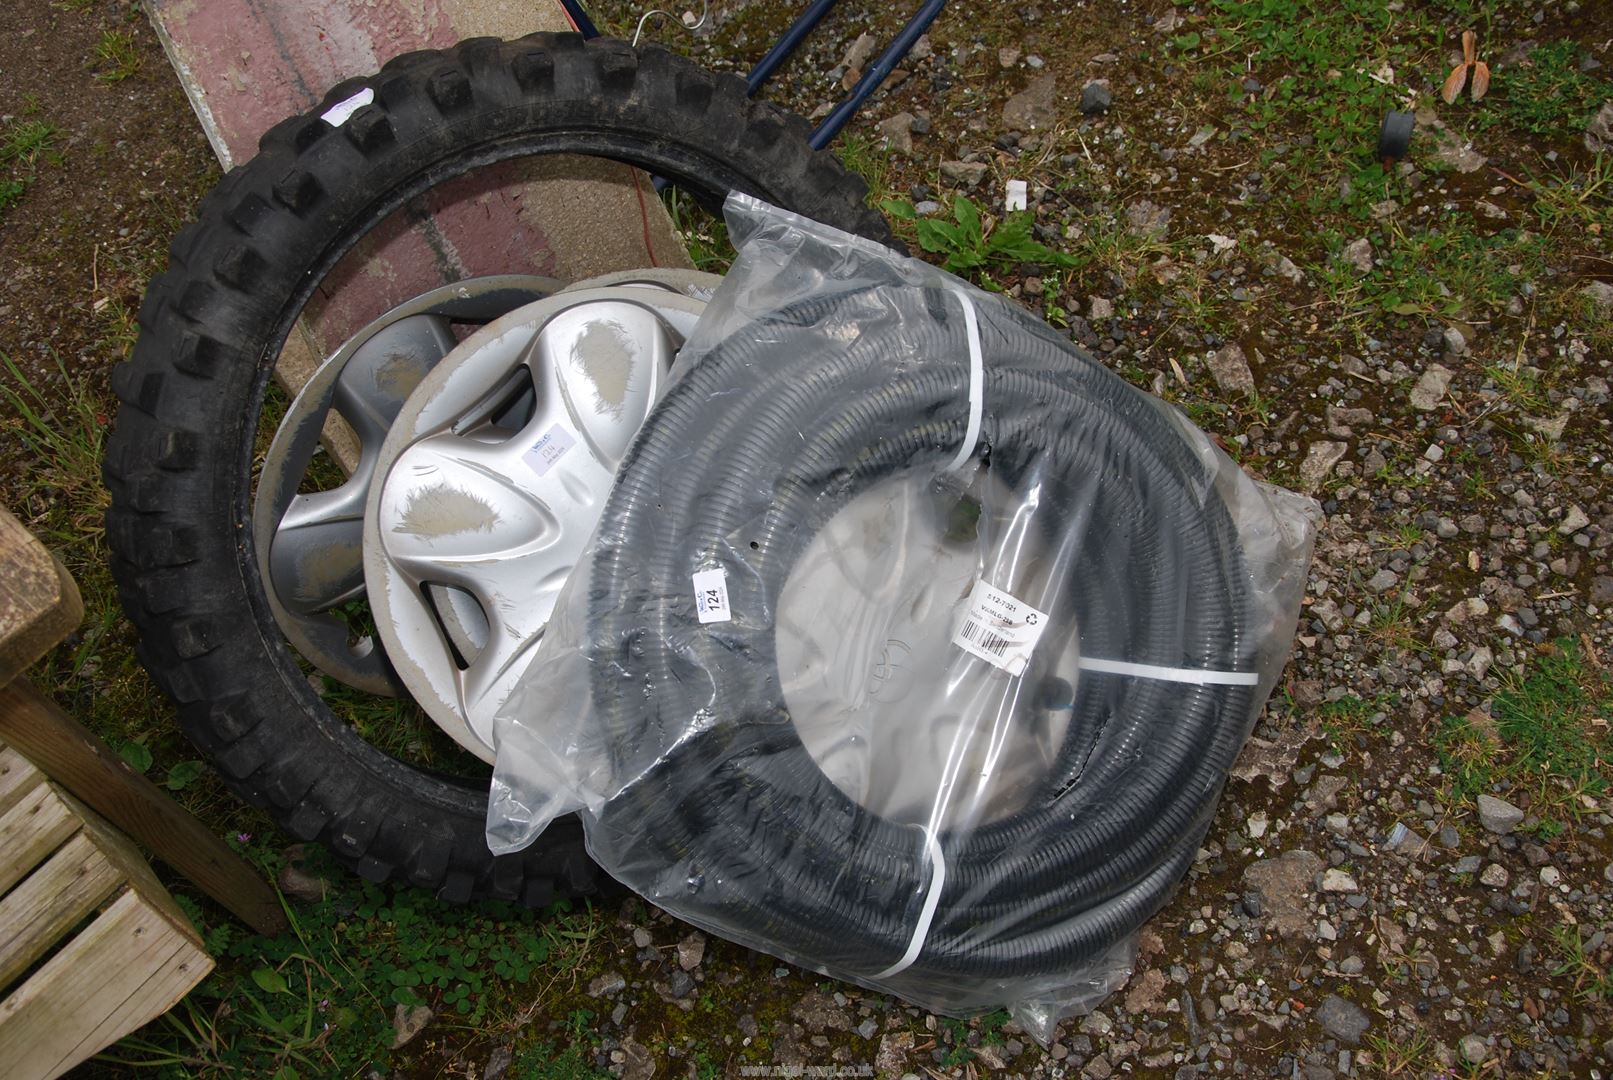 A motor cycle tyre, wheel trims and plastic hose.